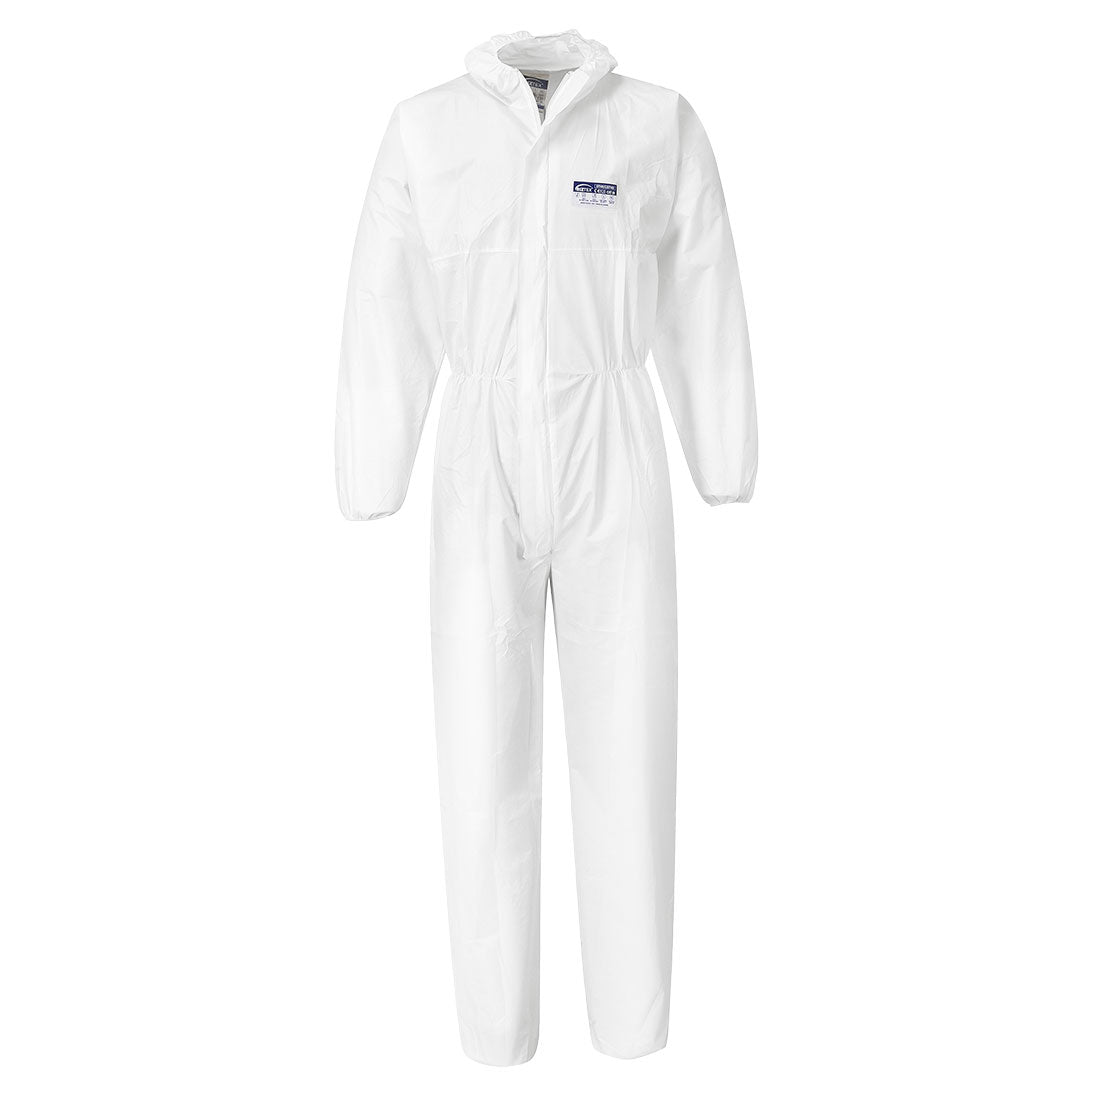 Portwest ST40 - BizTex Microporous Coverall - Type 5/6 - White - Large